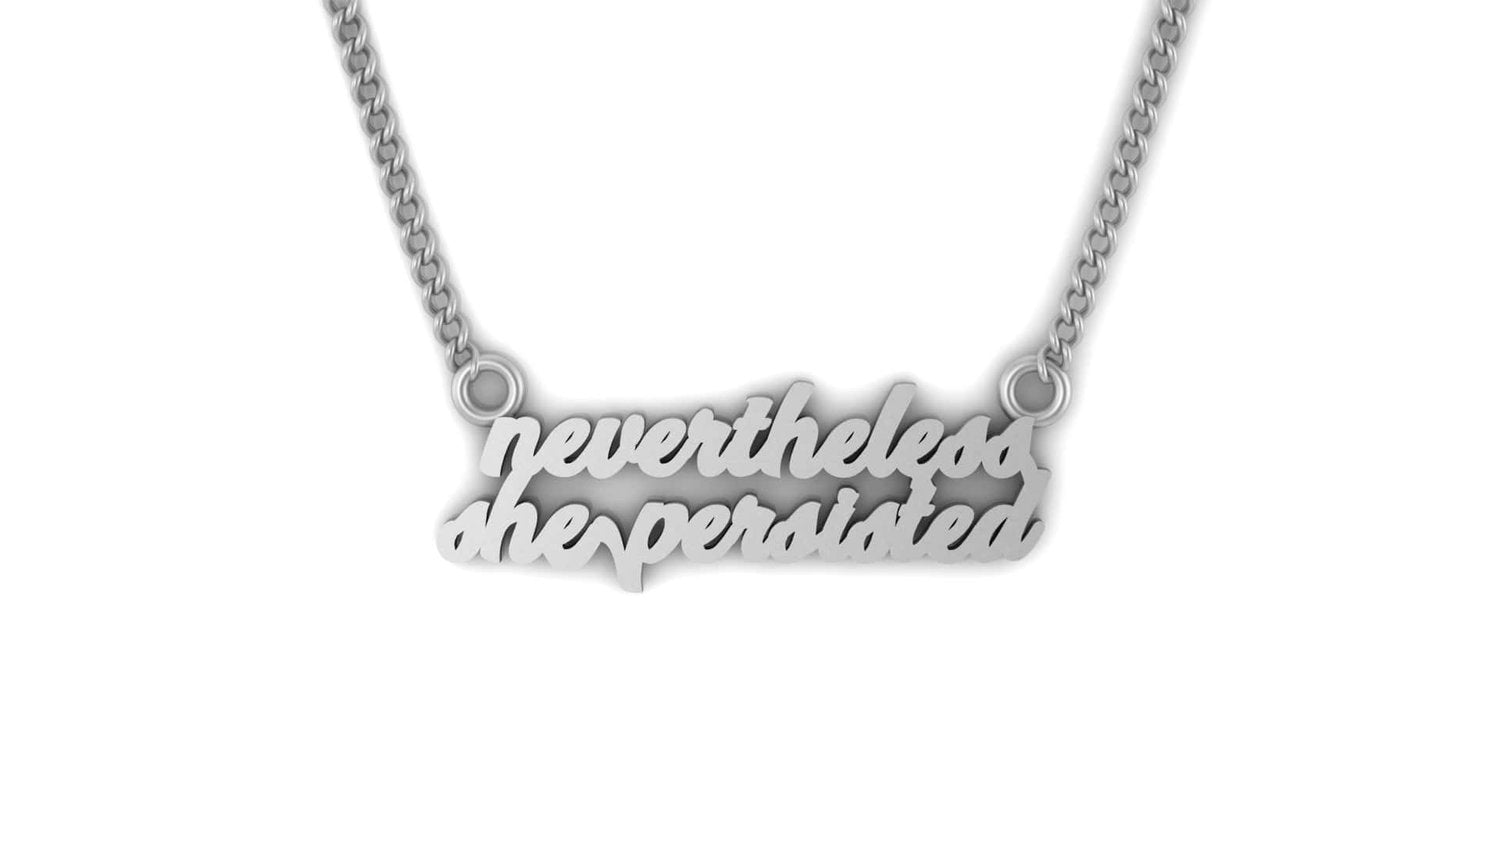 Nevertheless, She Persisted Pendant